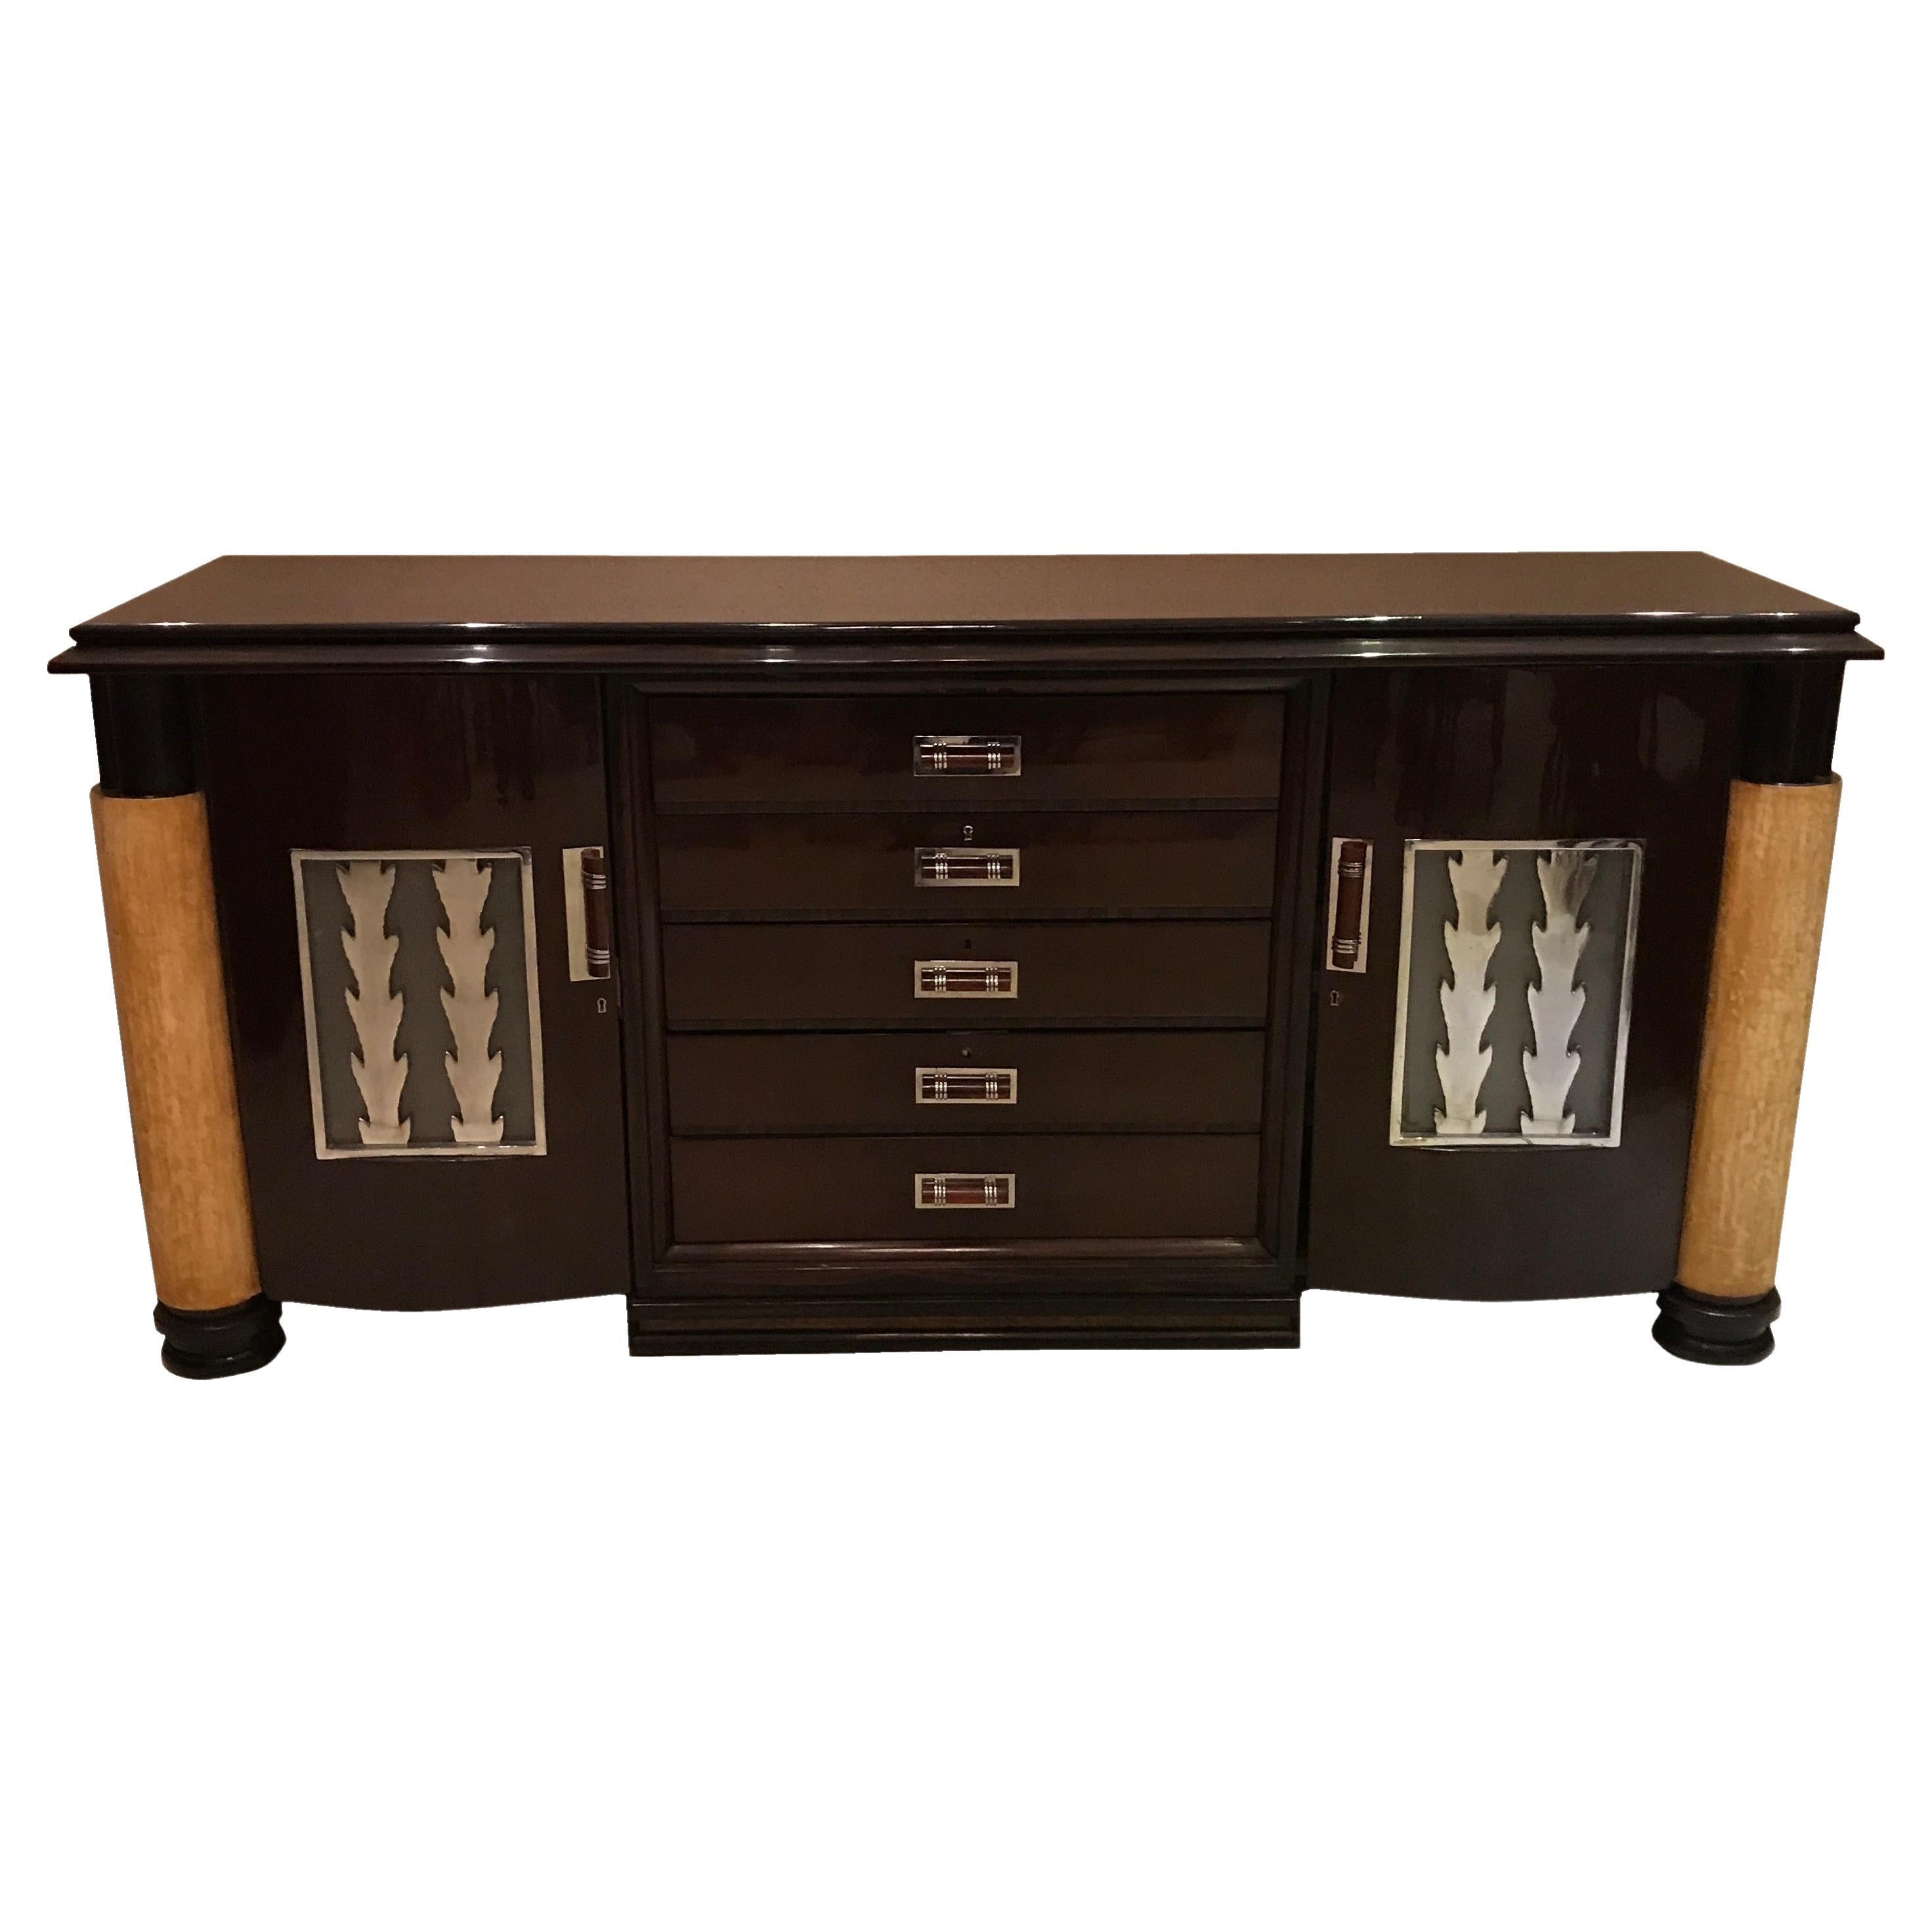 Art Deco Sideboard with Drawers in Wood, Parchment leather and Bronze Chromed